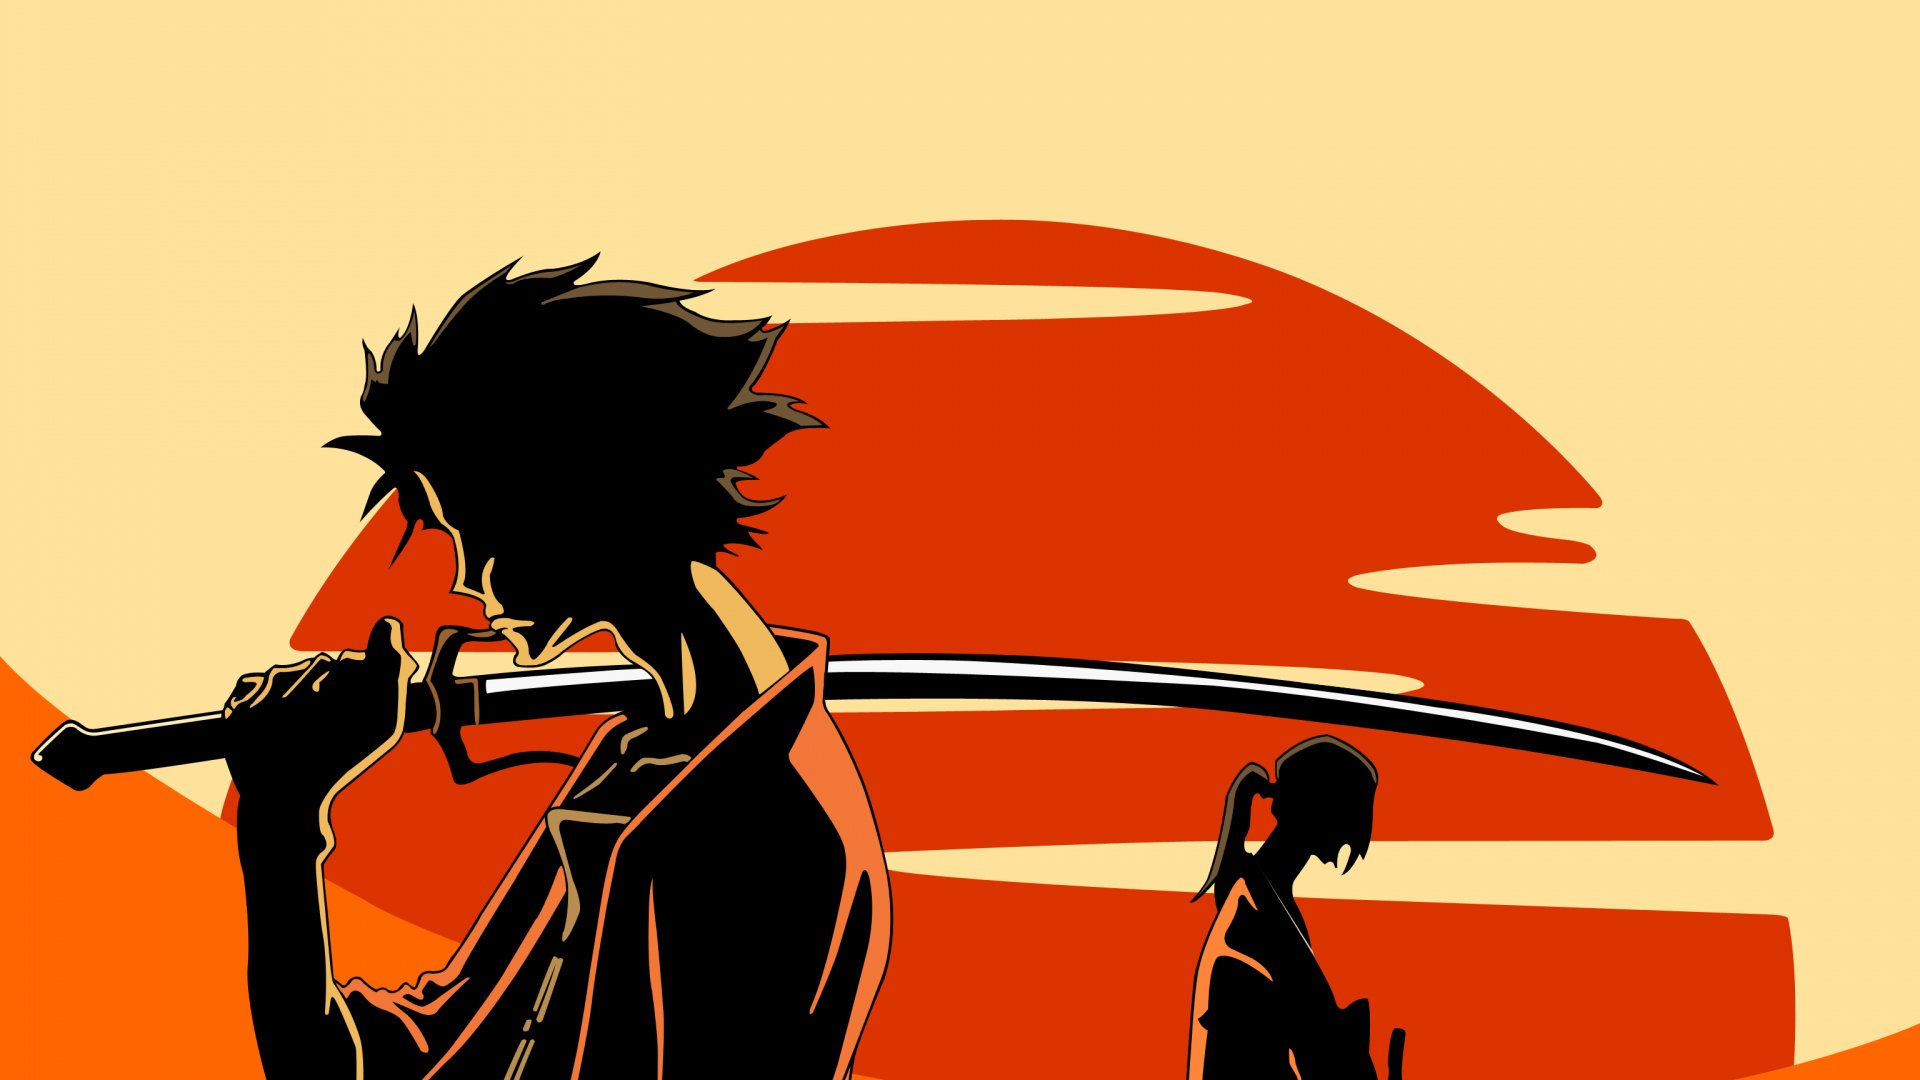 1920x1080 80+ Samurai Champloo HD Wallpapers and Backgrounds